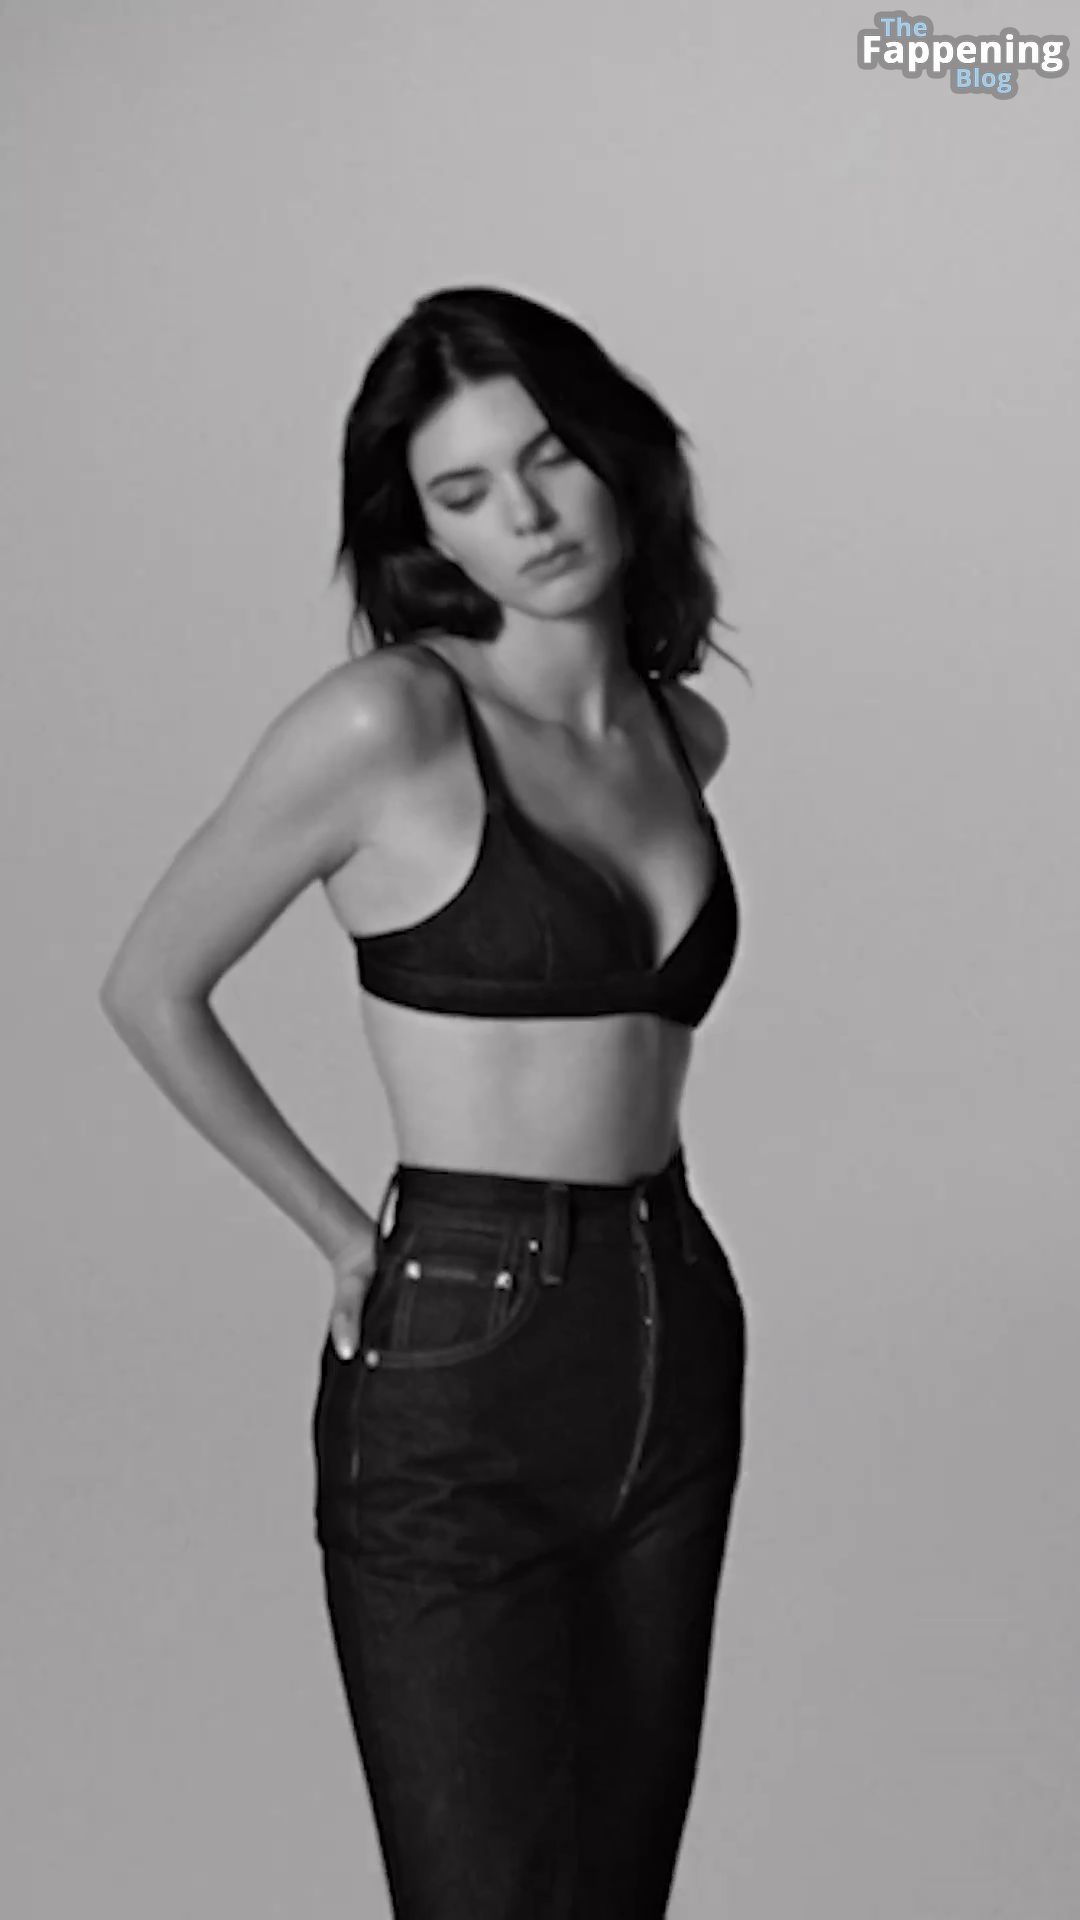 Kendall Jenner Promotes a New Calvin Klein Collection (20 Pics + Video)